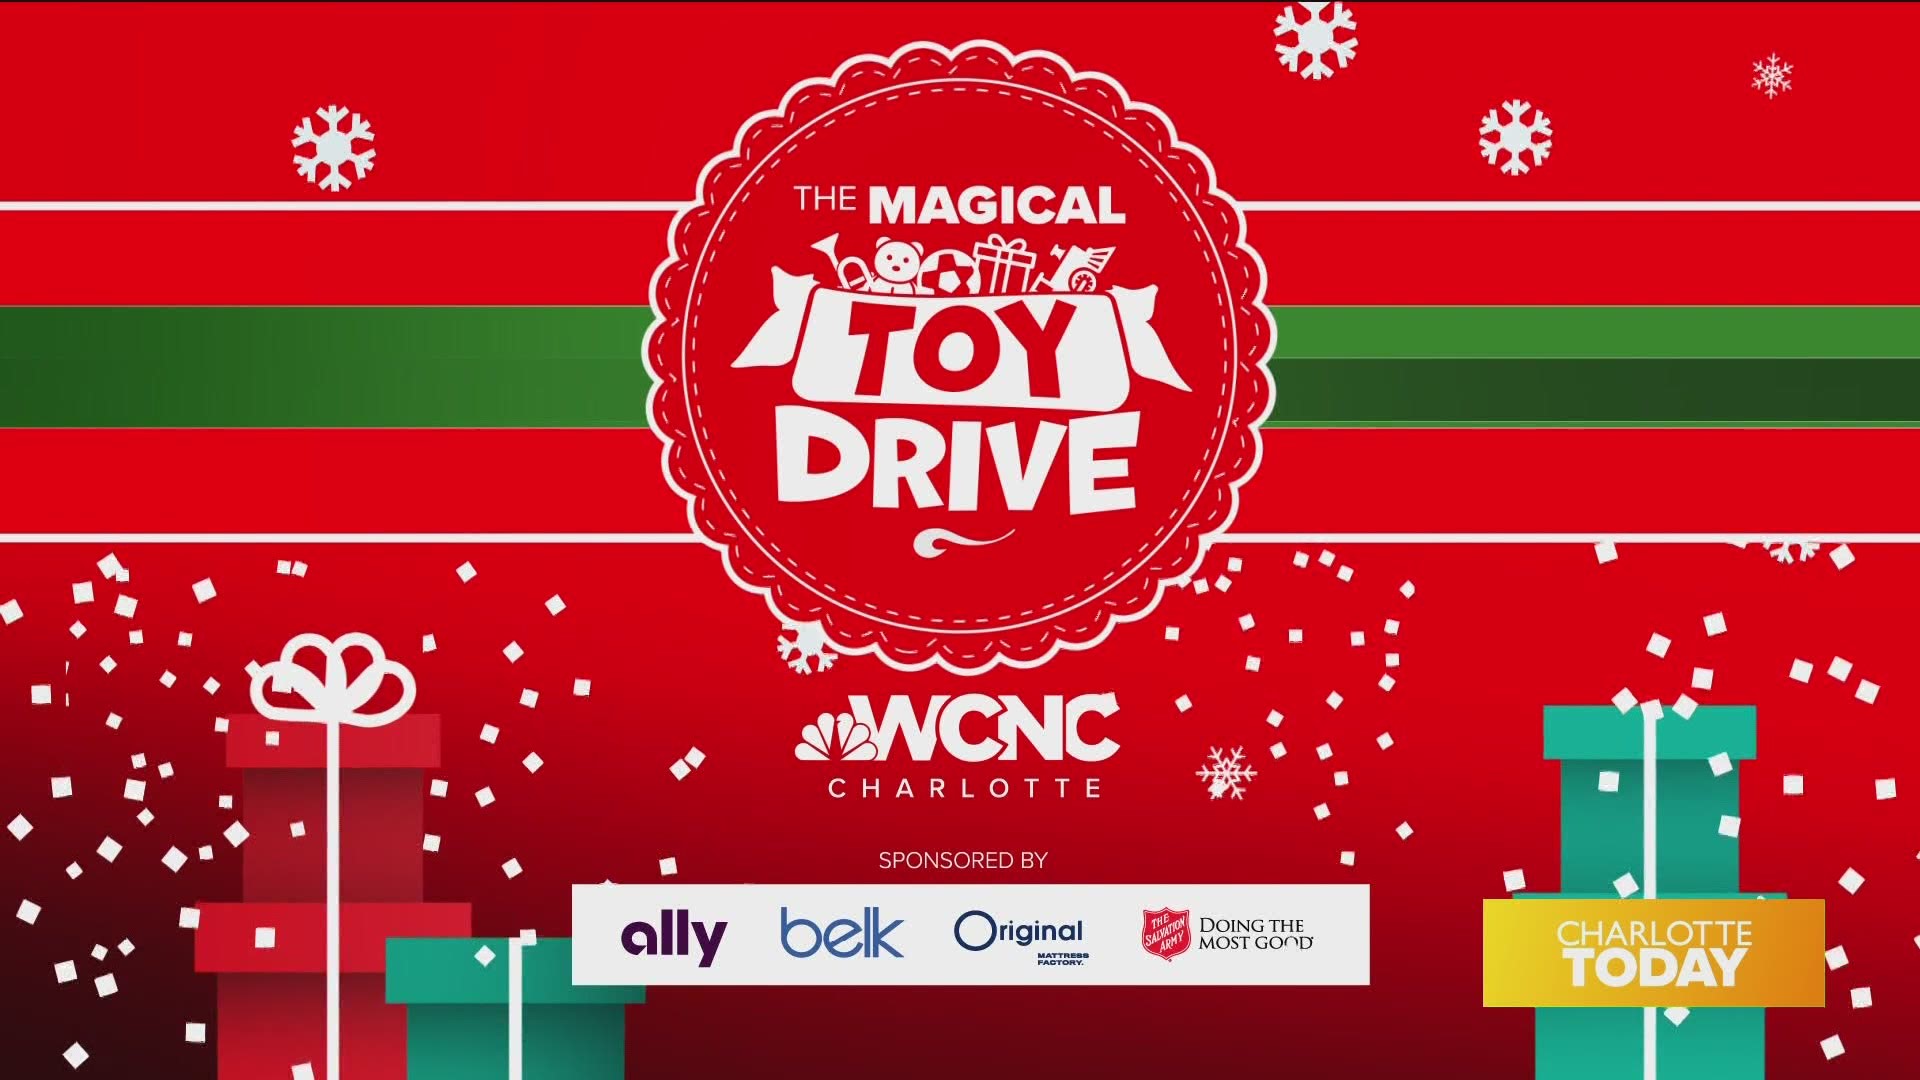 Local company doing its part to help kids have a magical holiday